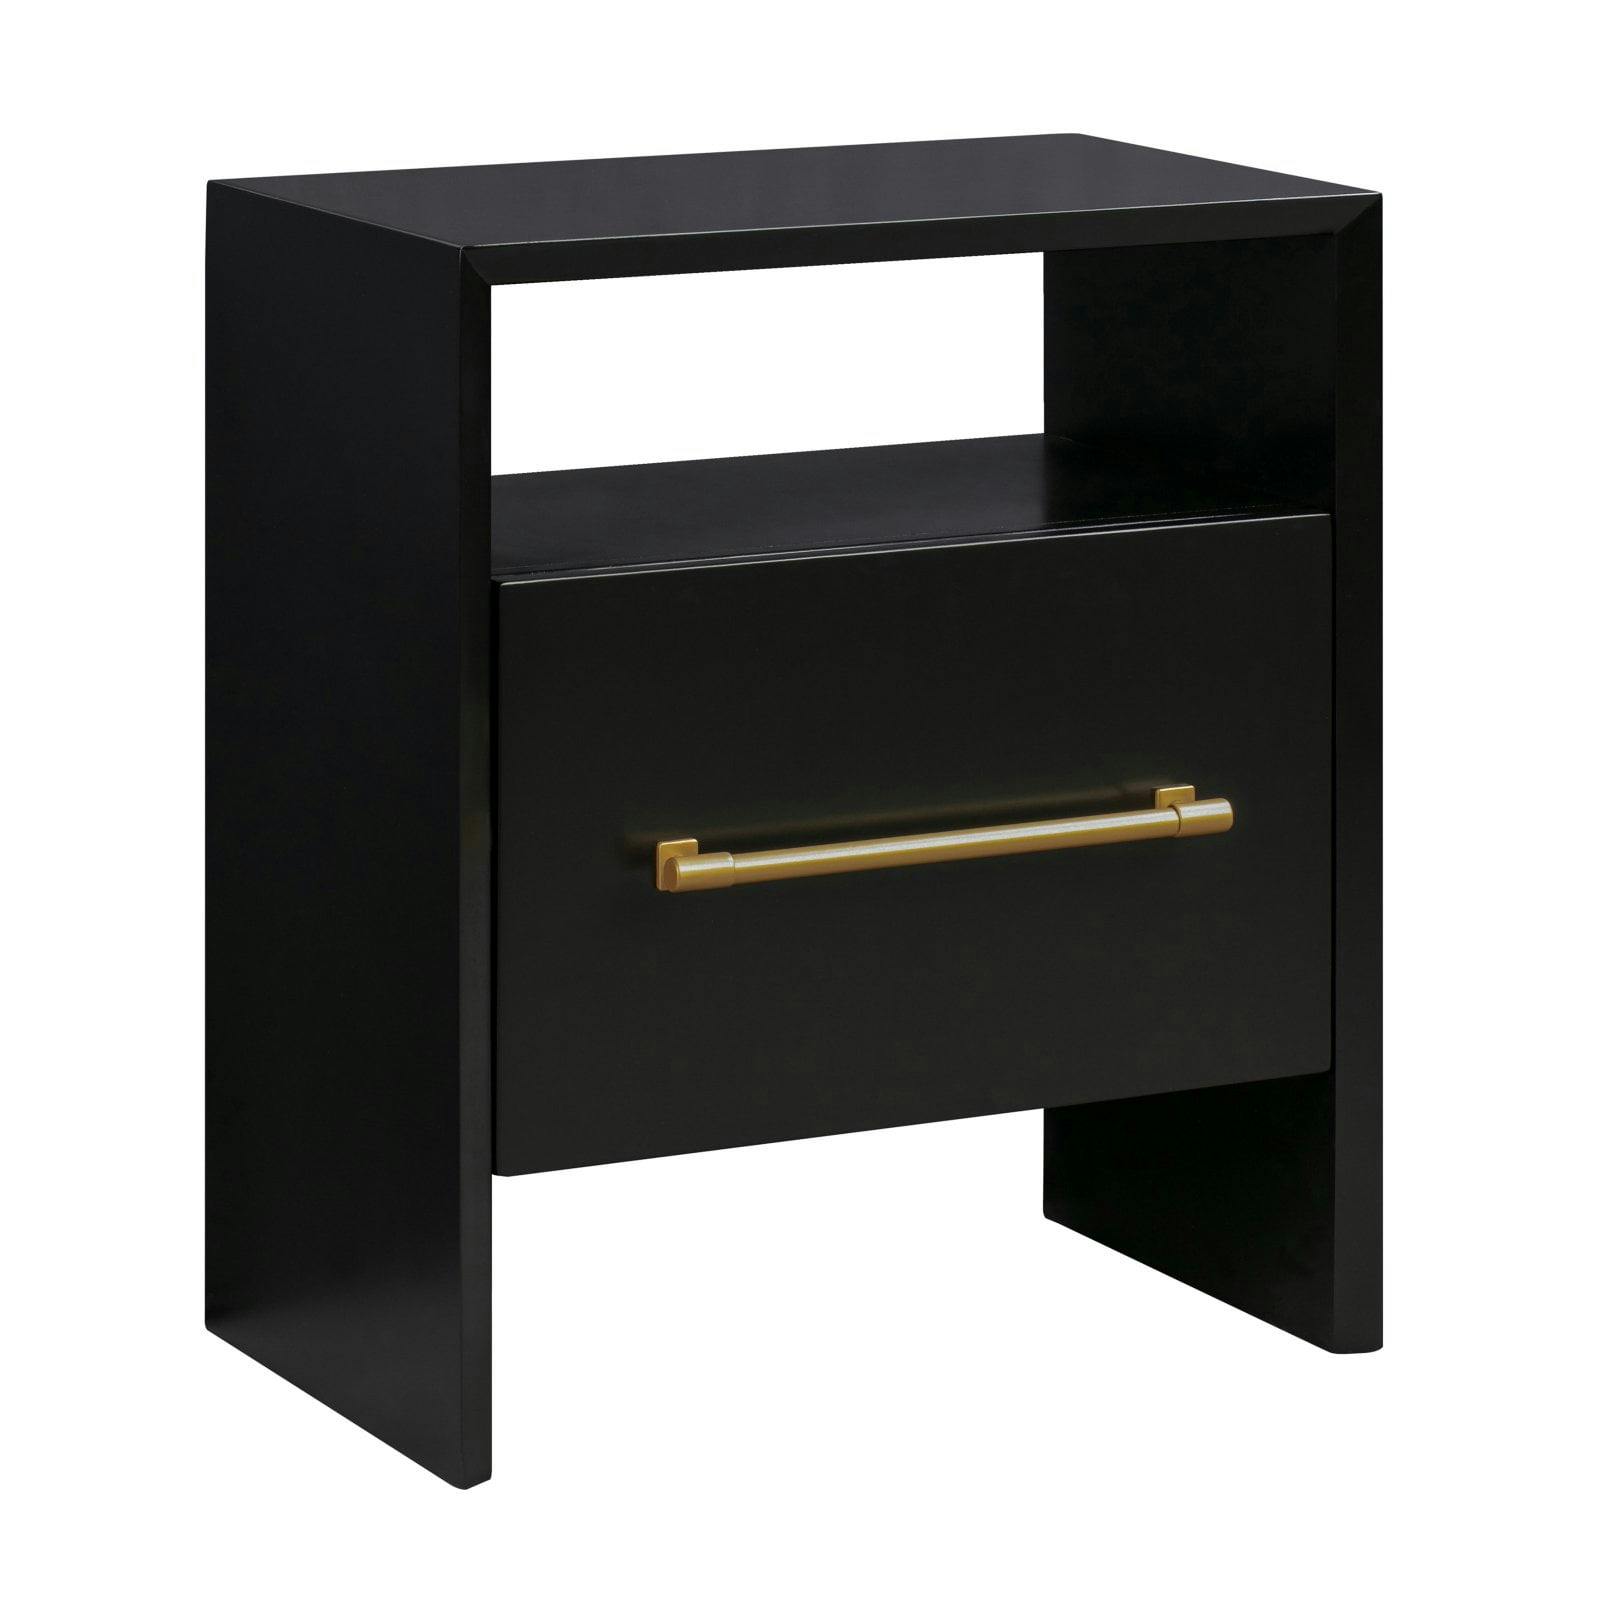 Libre Contemporary Black Nightstand with Gold Accents and Storage Shelf